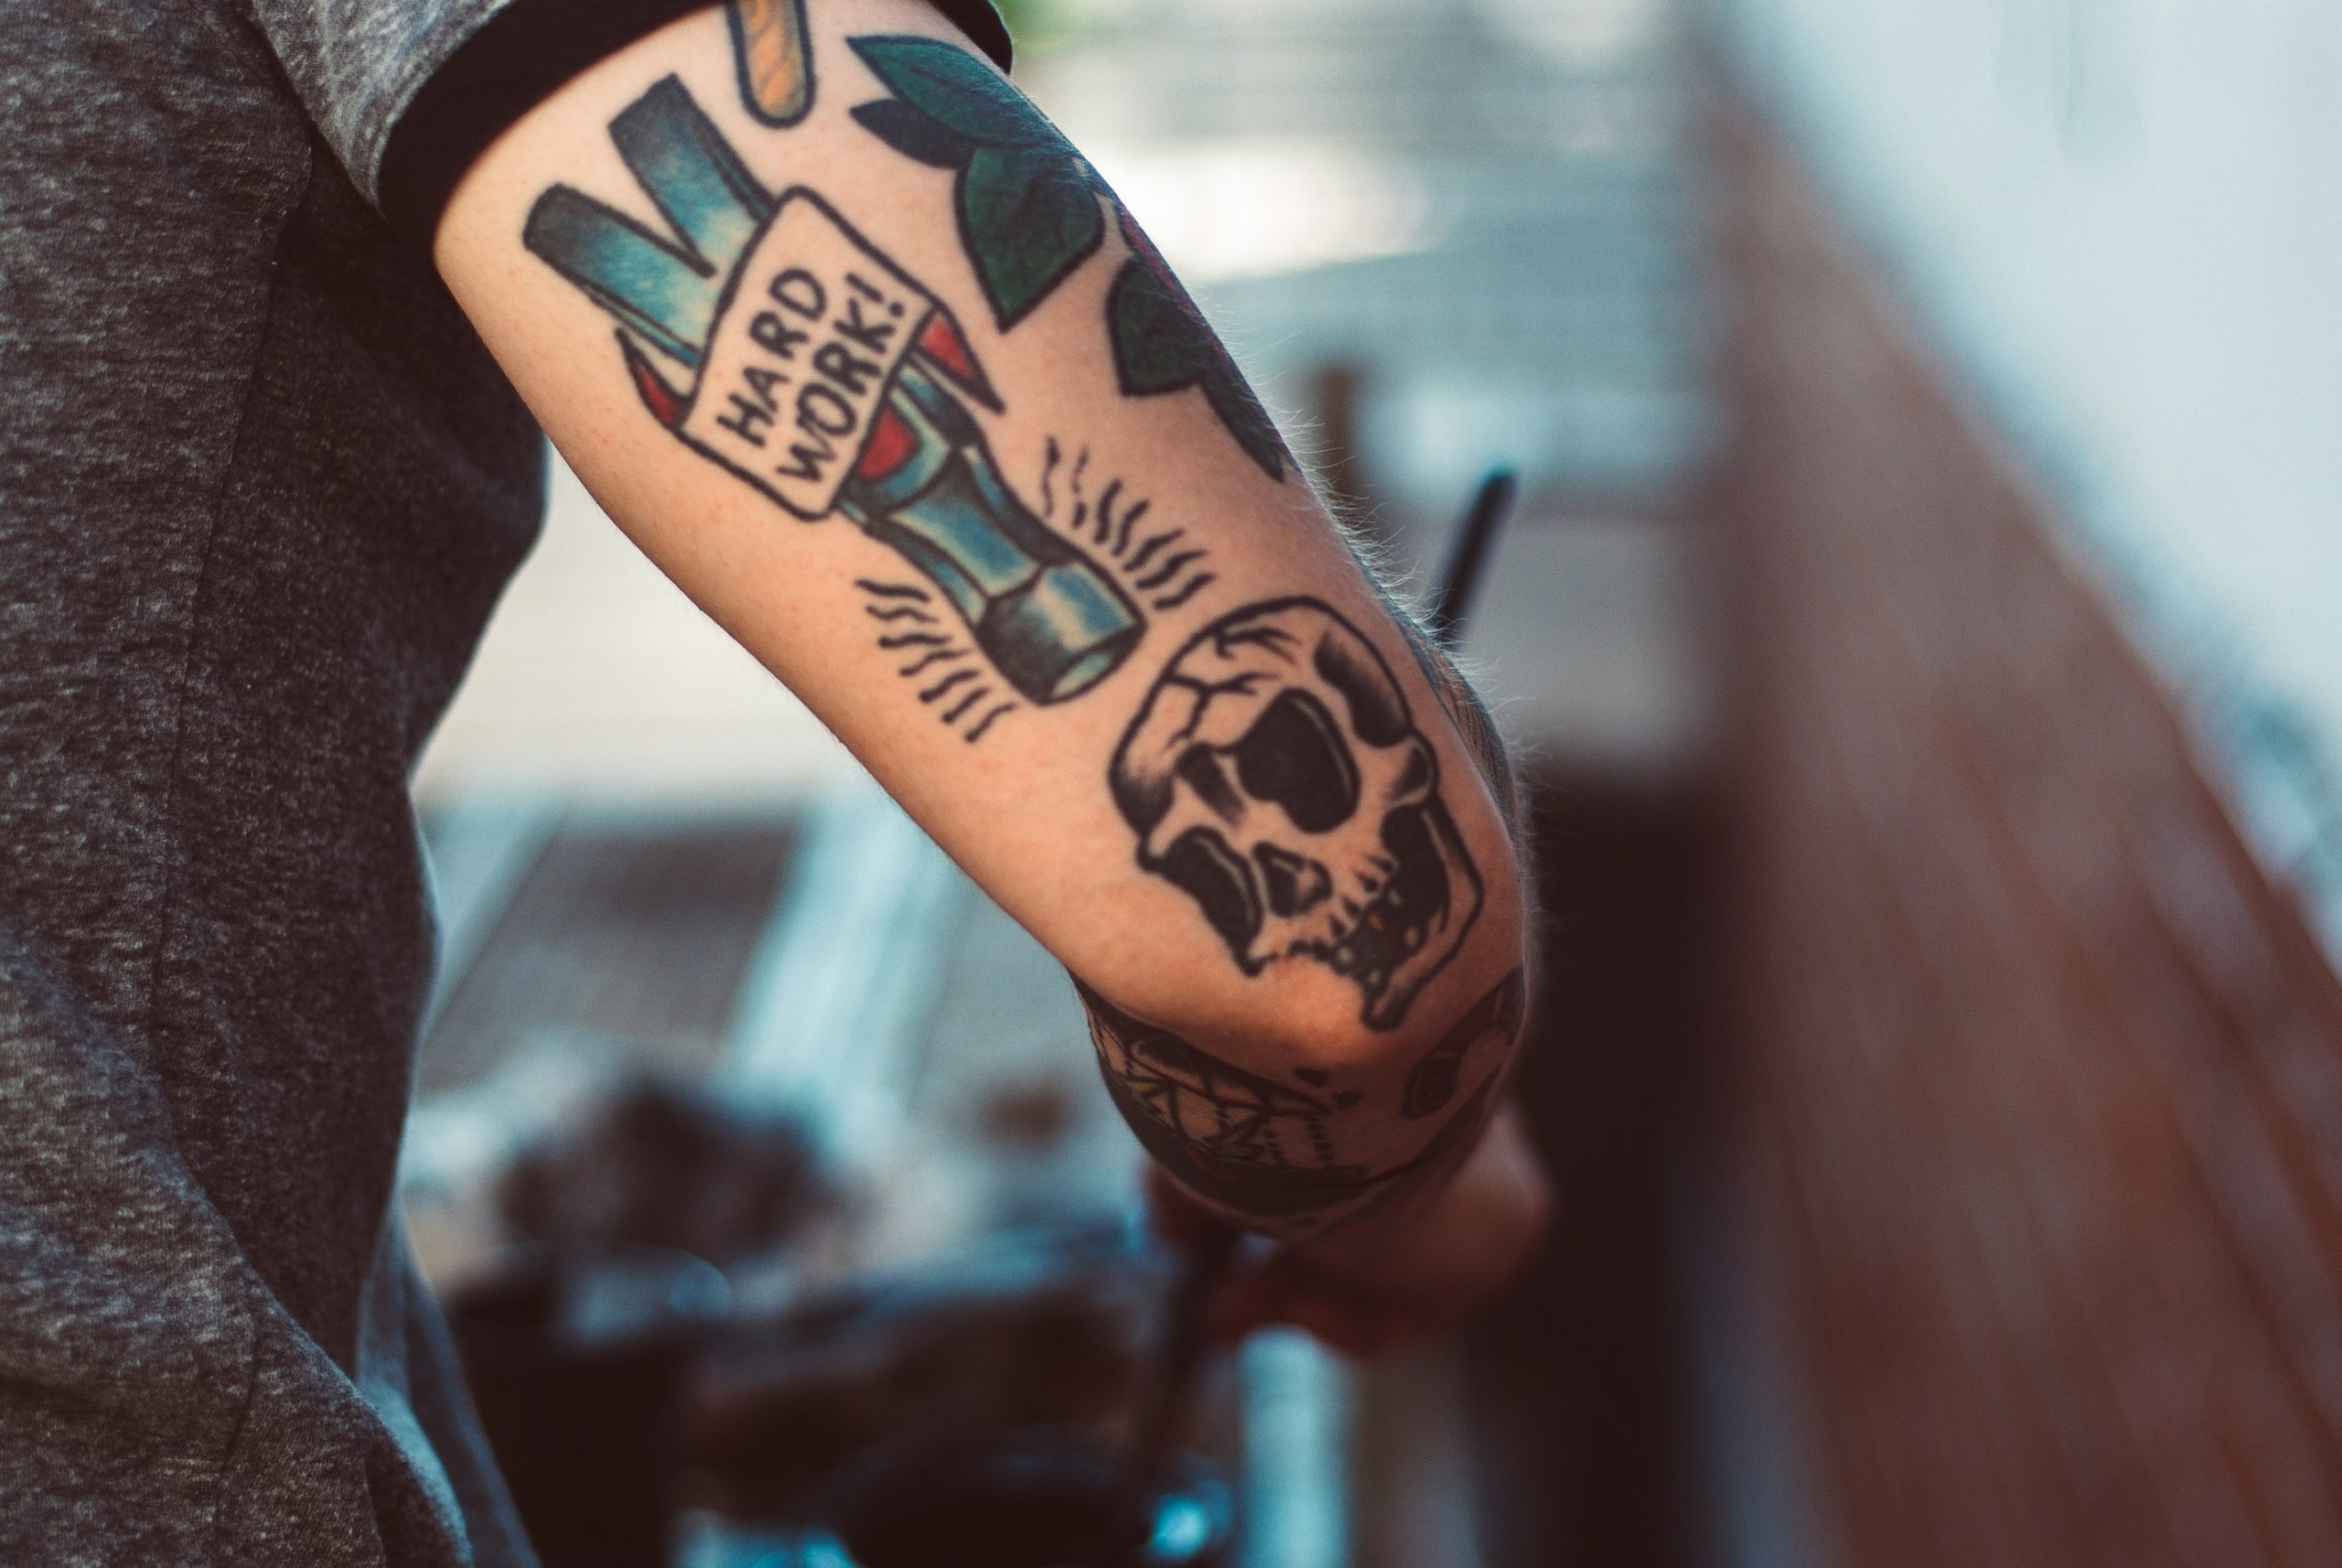 Everything you need to know before getting your first tattoo